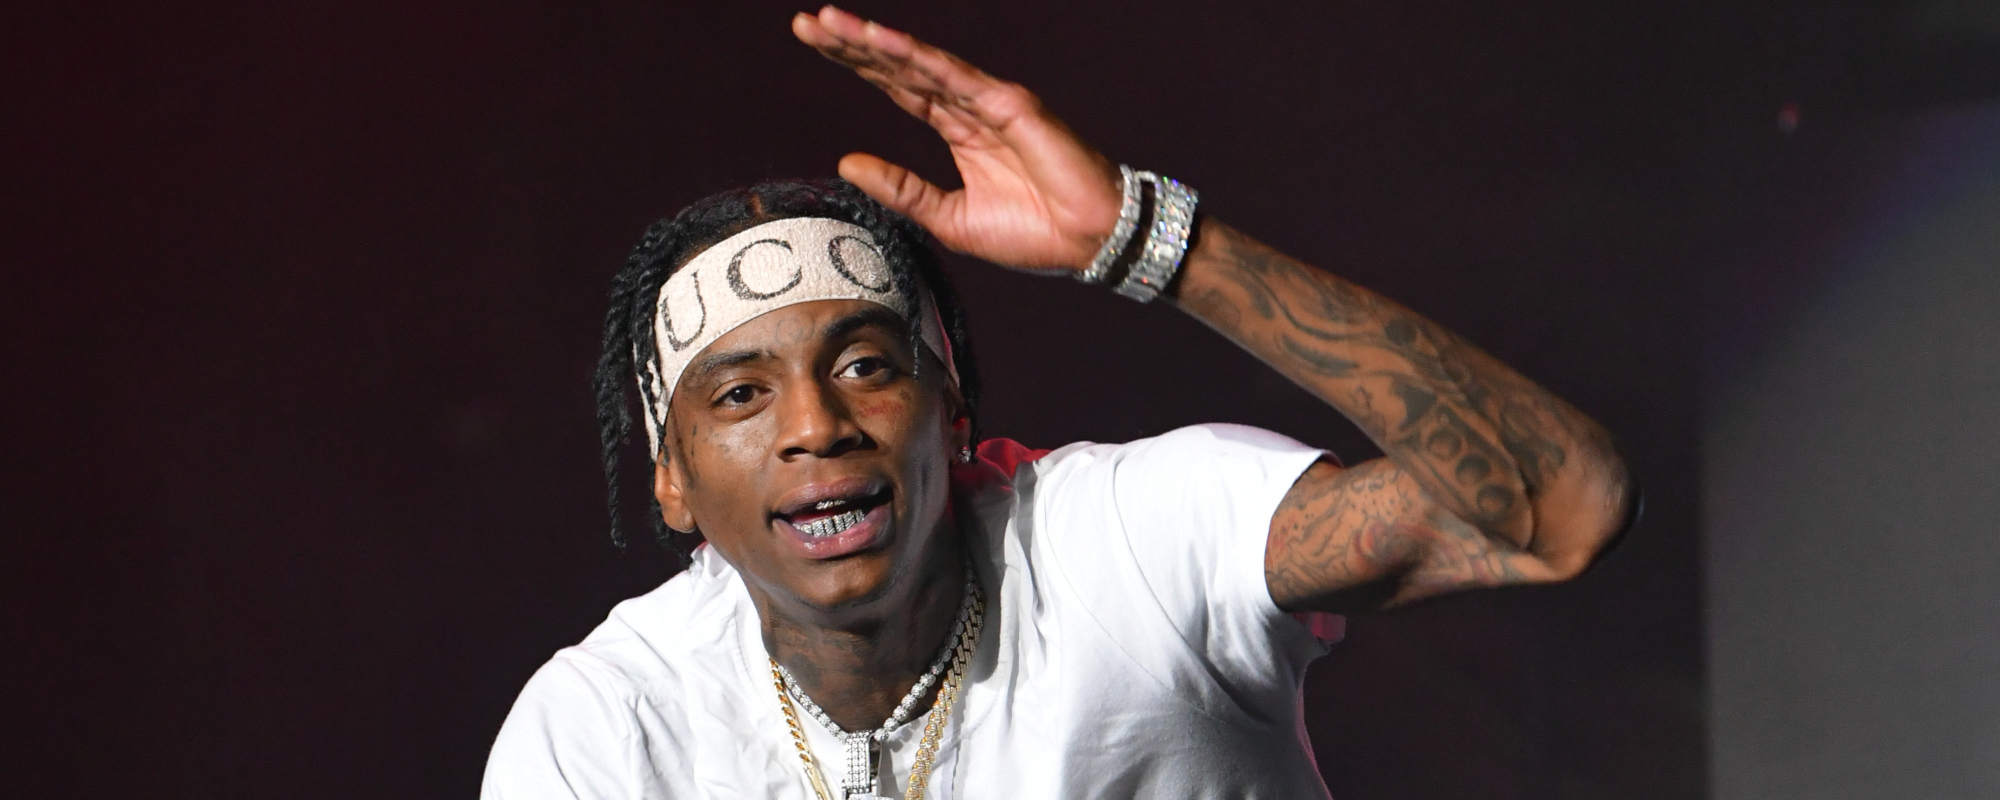 Soulja Boy Ordered to Pay Close to Quarter Million Dollars to Ex-Girlfriend in Assault Case